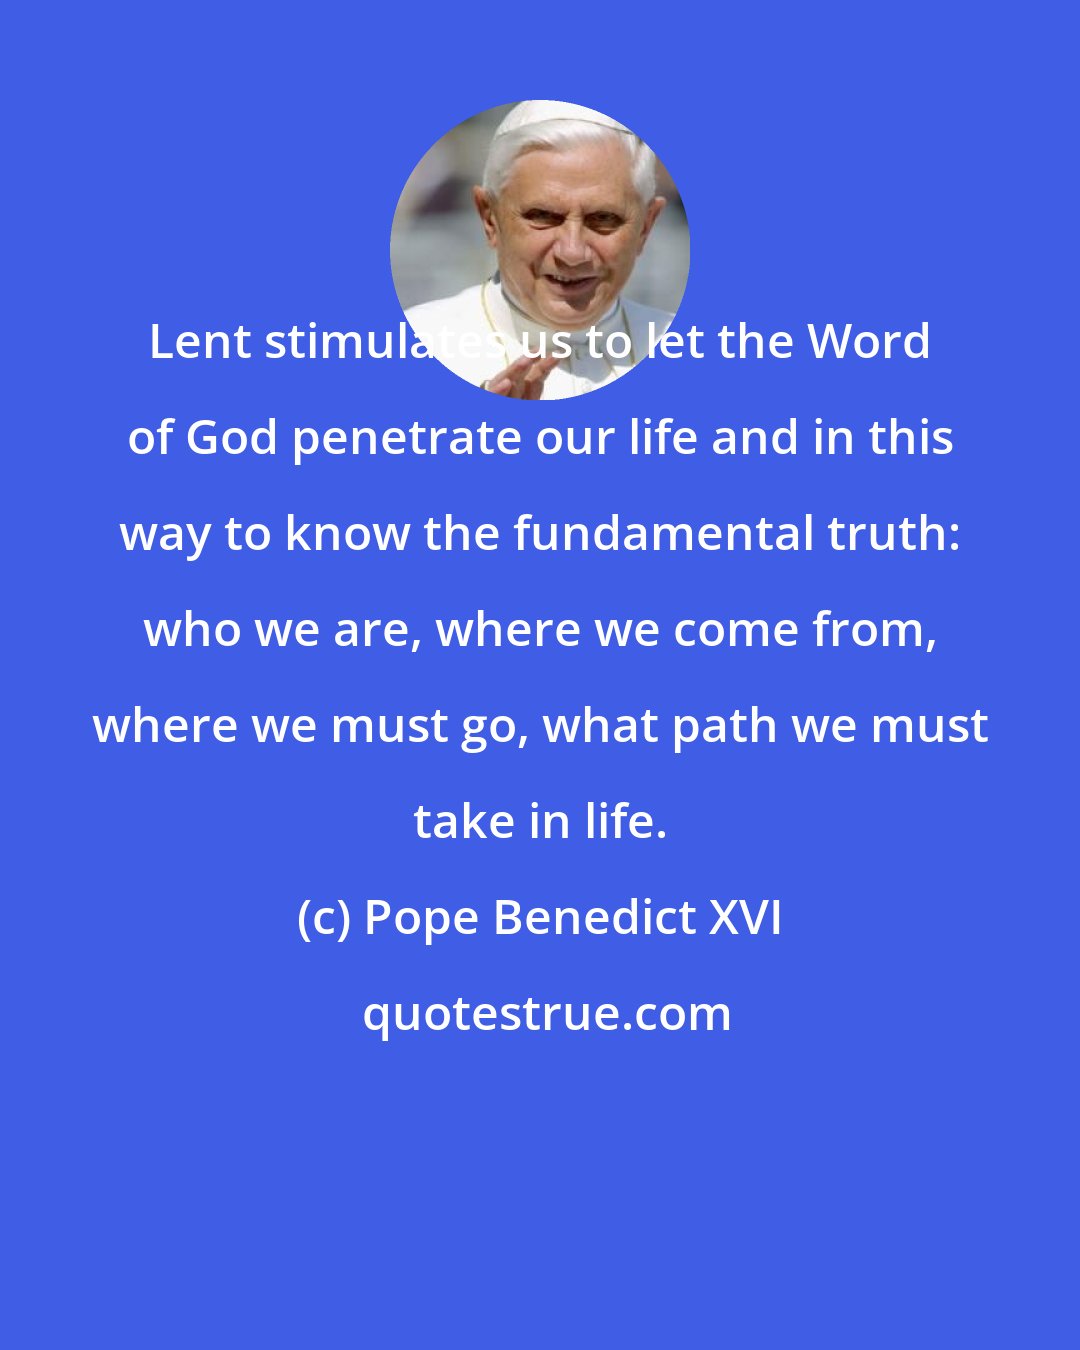 Pope Benedict XVI: Lent stimulates us to let the Word of God penetrate our life and in this way to know the fundamental truth: who we are, where we come from, where we must go, what path we must take in life.